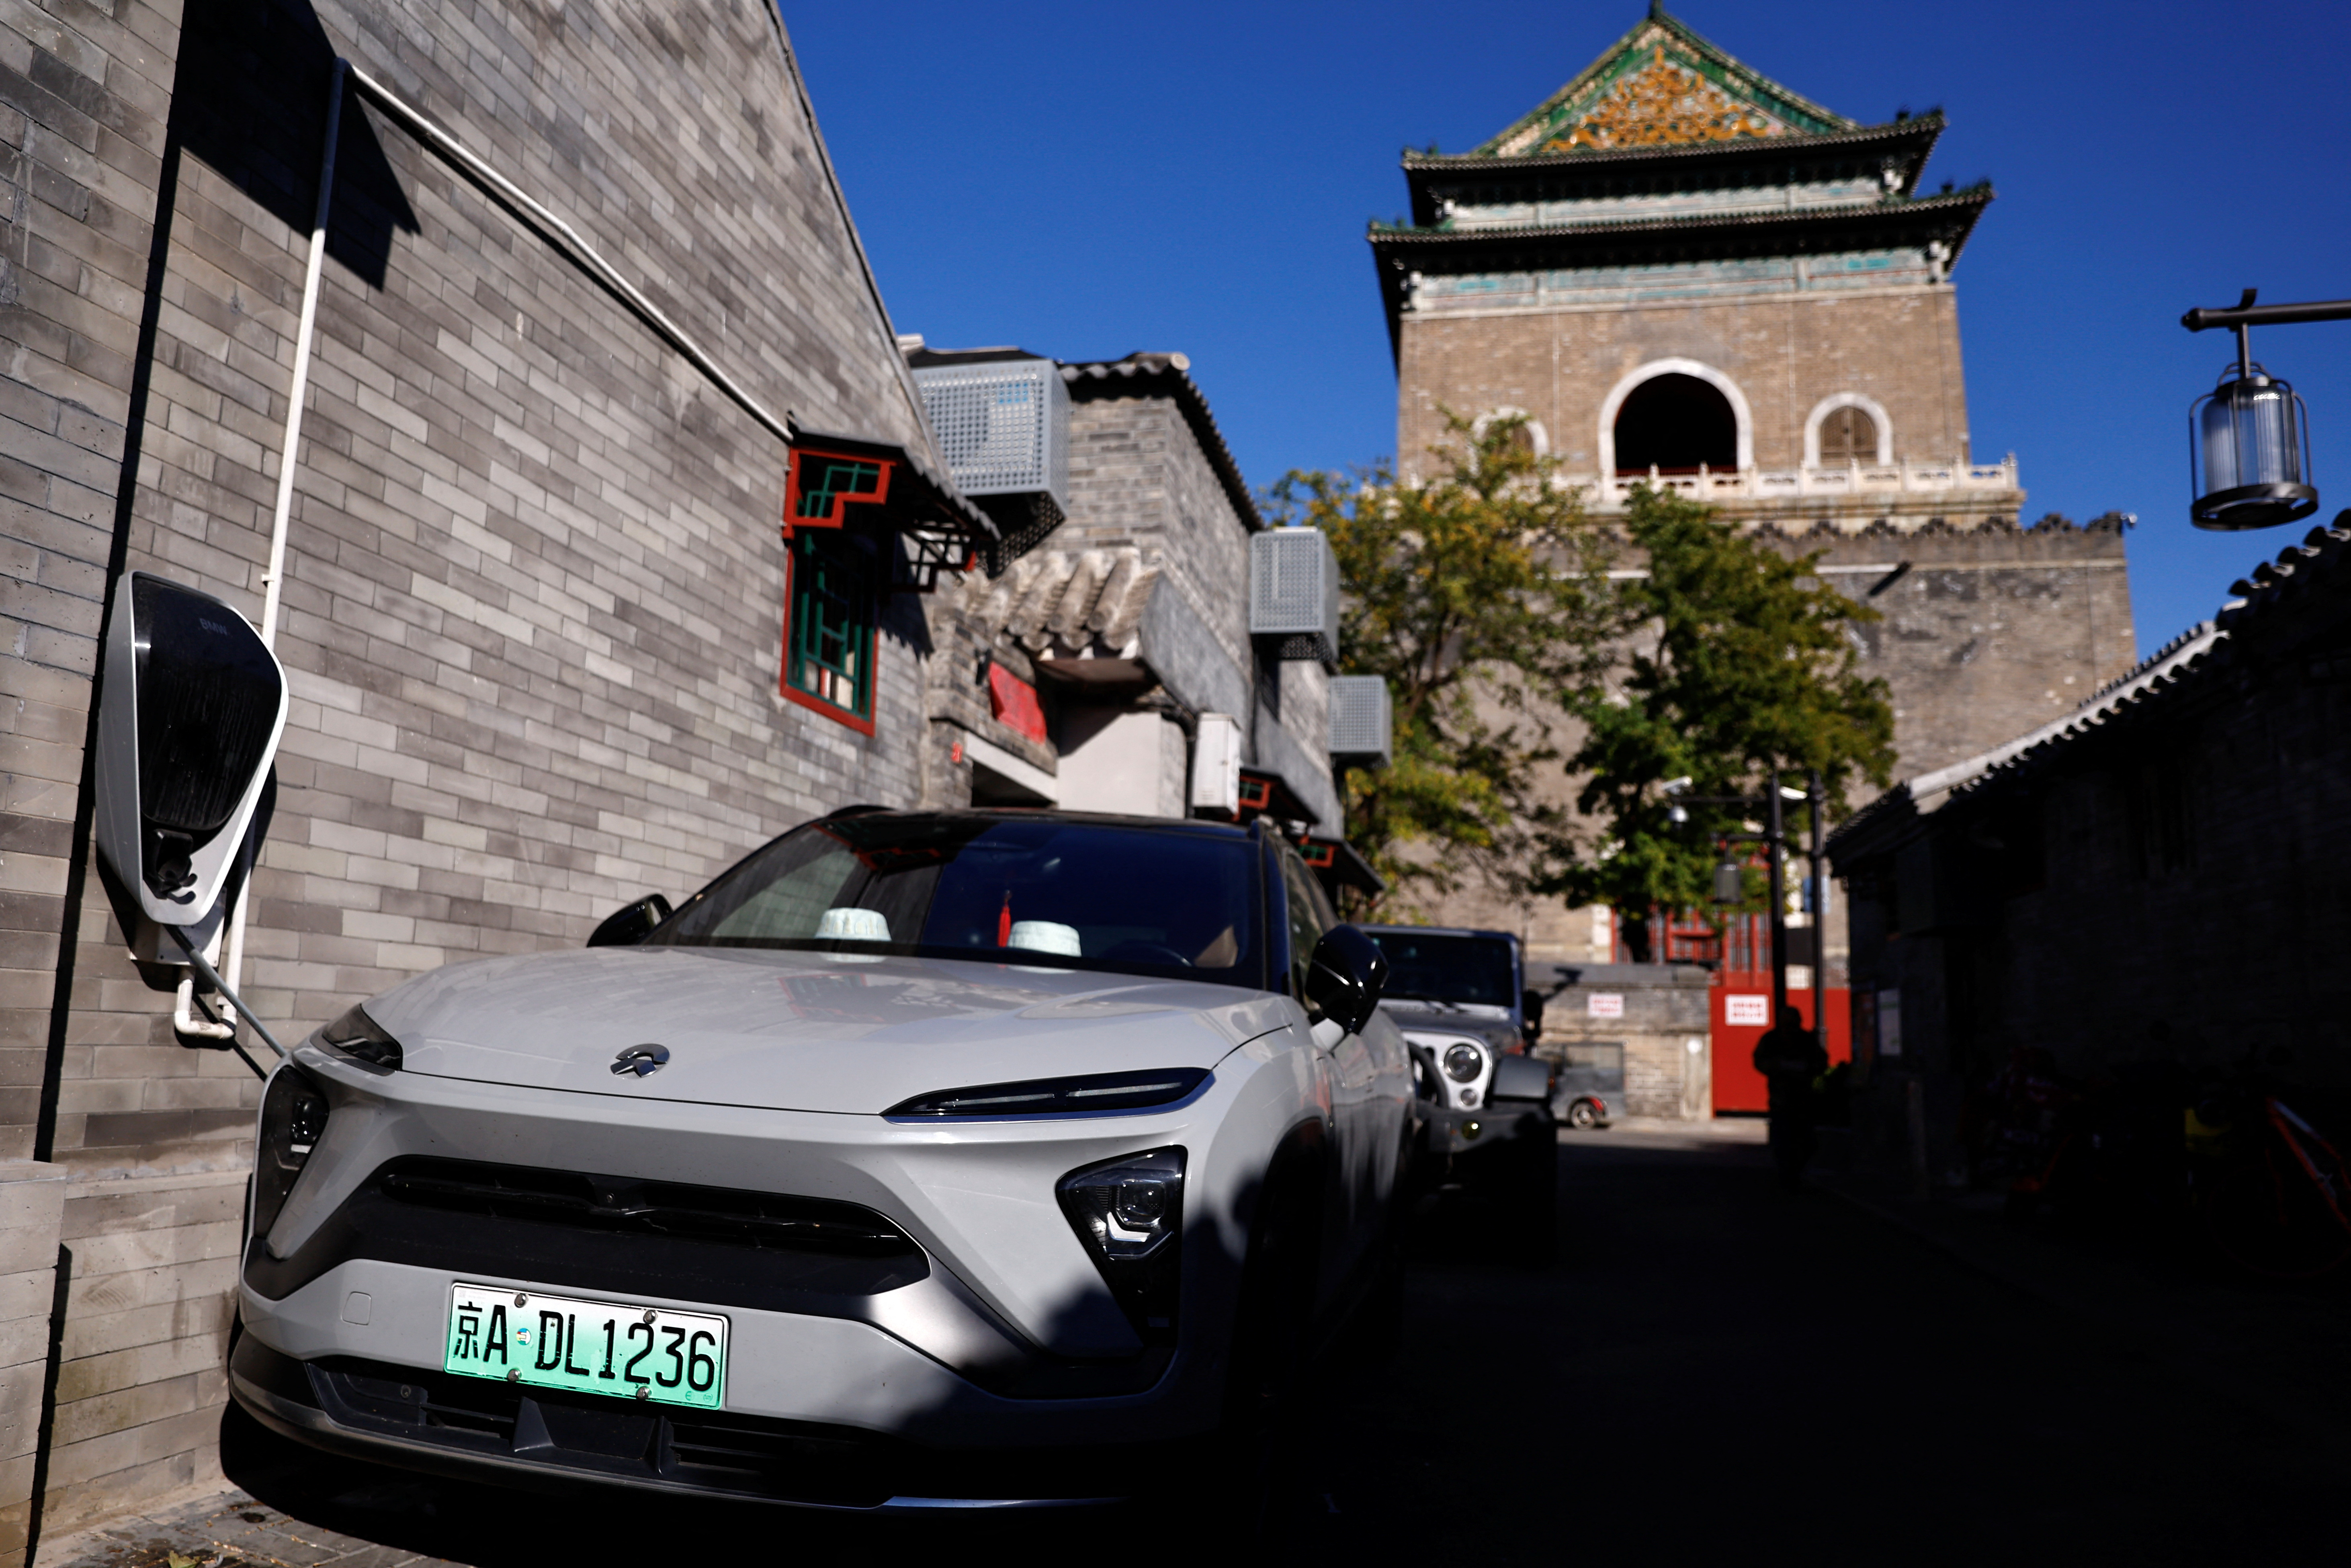 Nio's electric vehicle (EV) is parked near the Bell Tower in Beijing